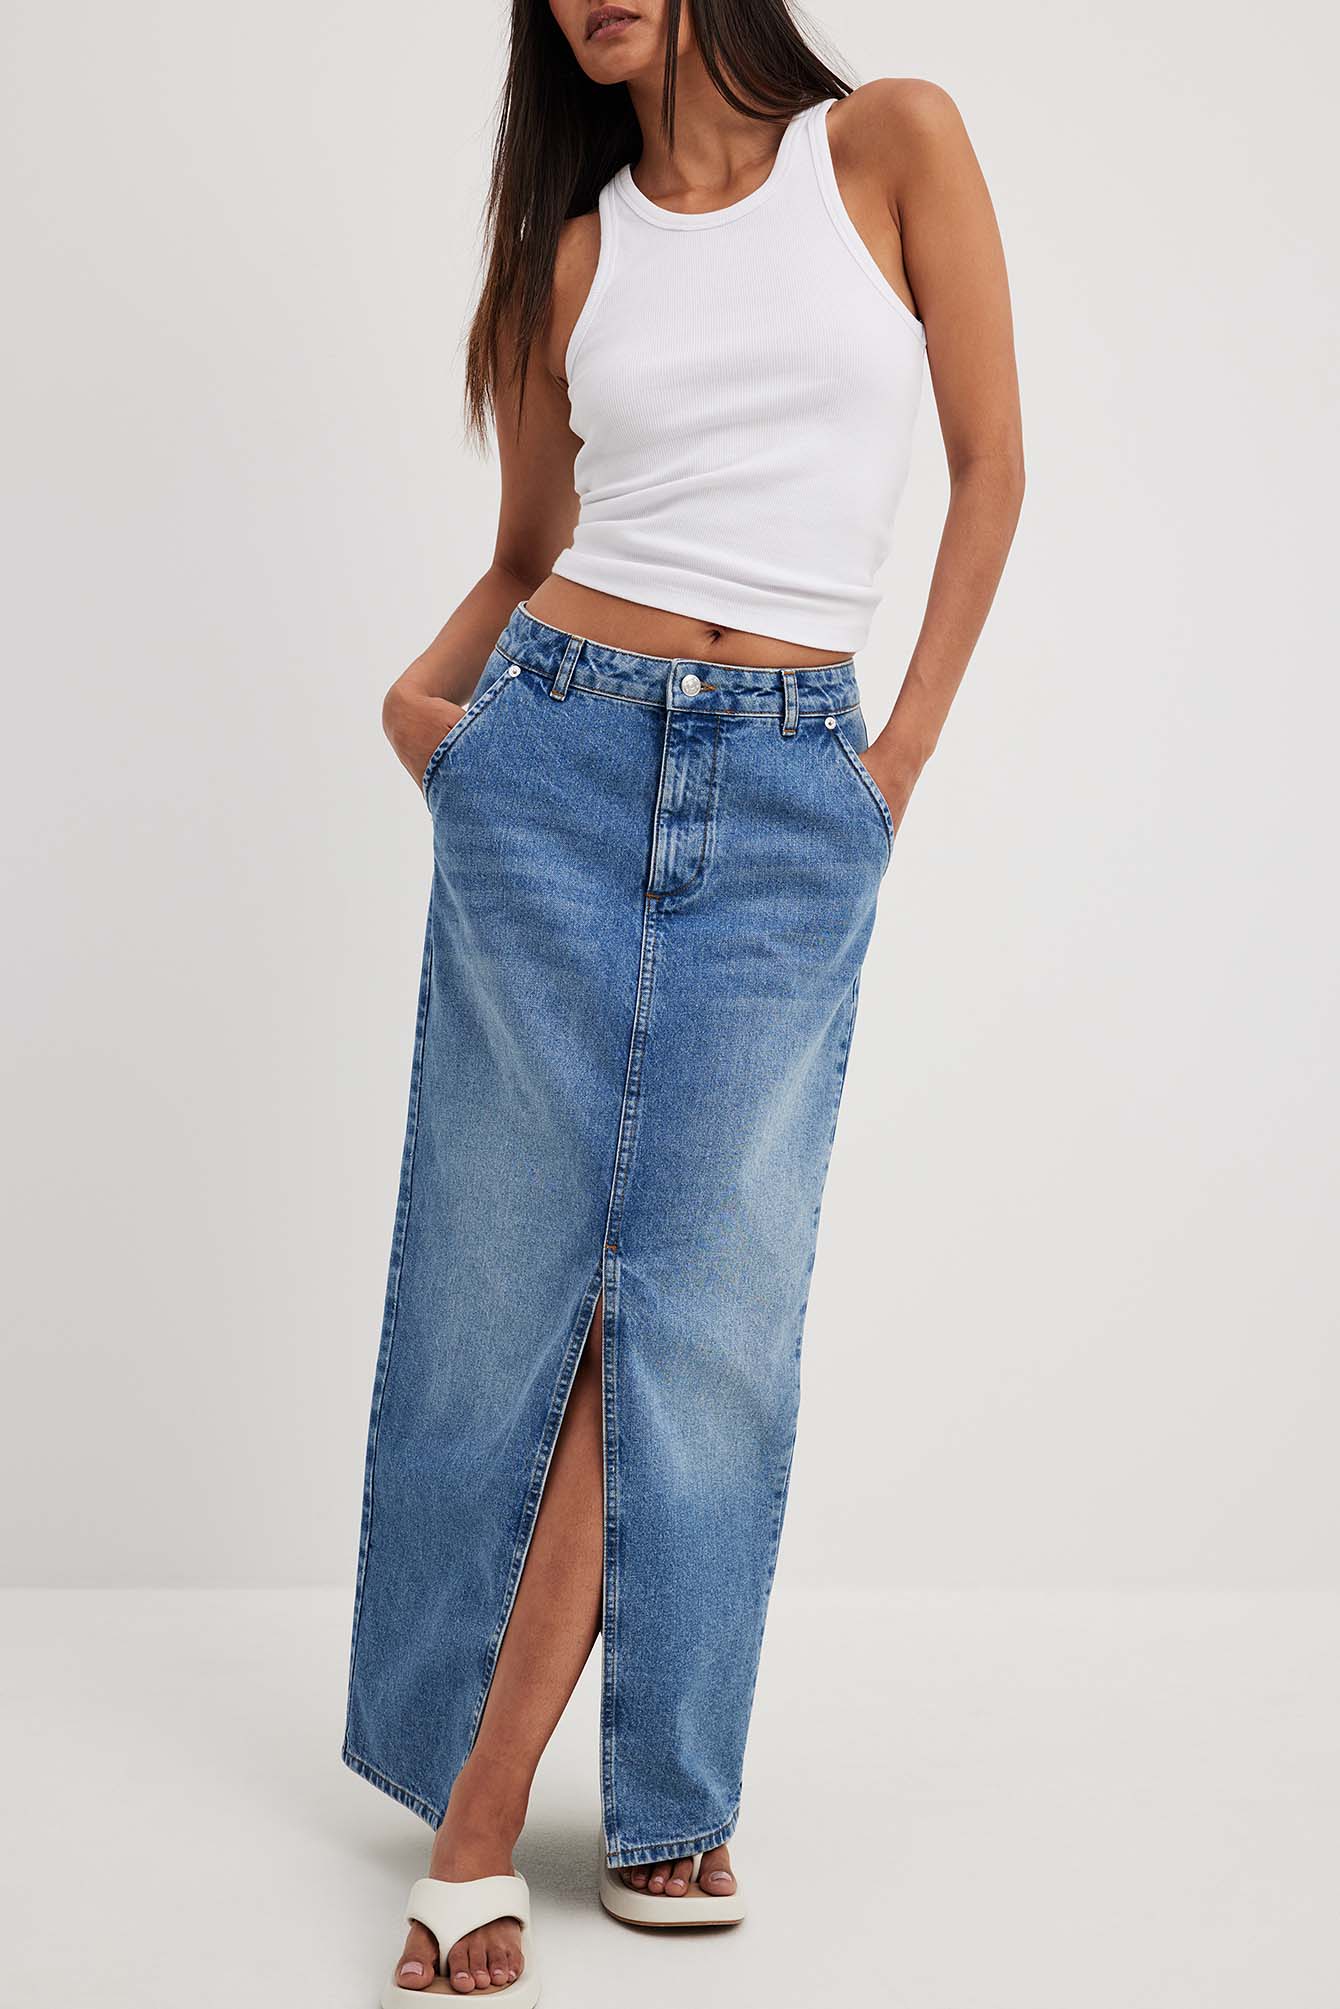 Maxi Denim Skirt By Cotton On Trending Now!, 48% OFF